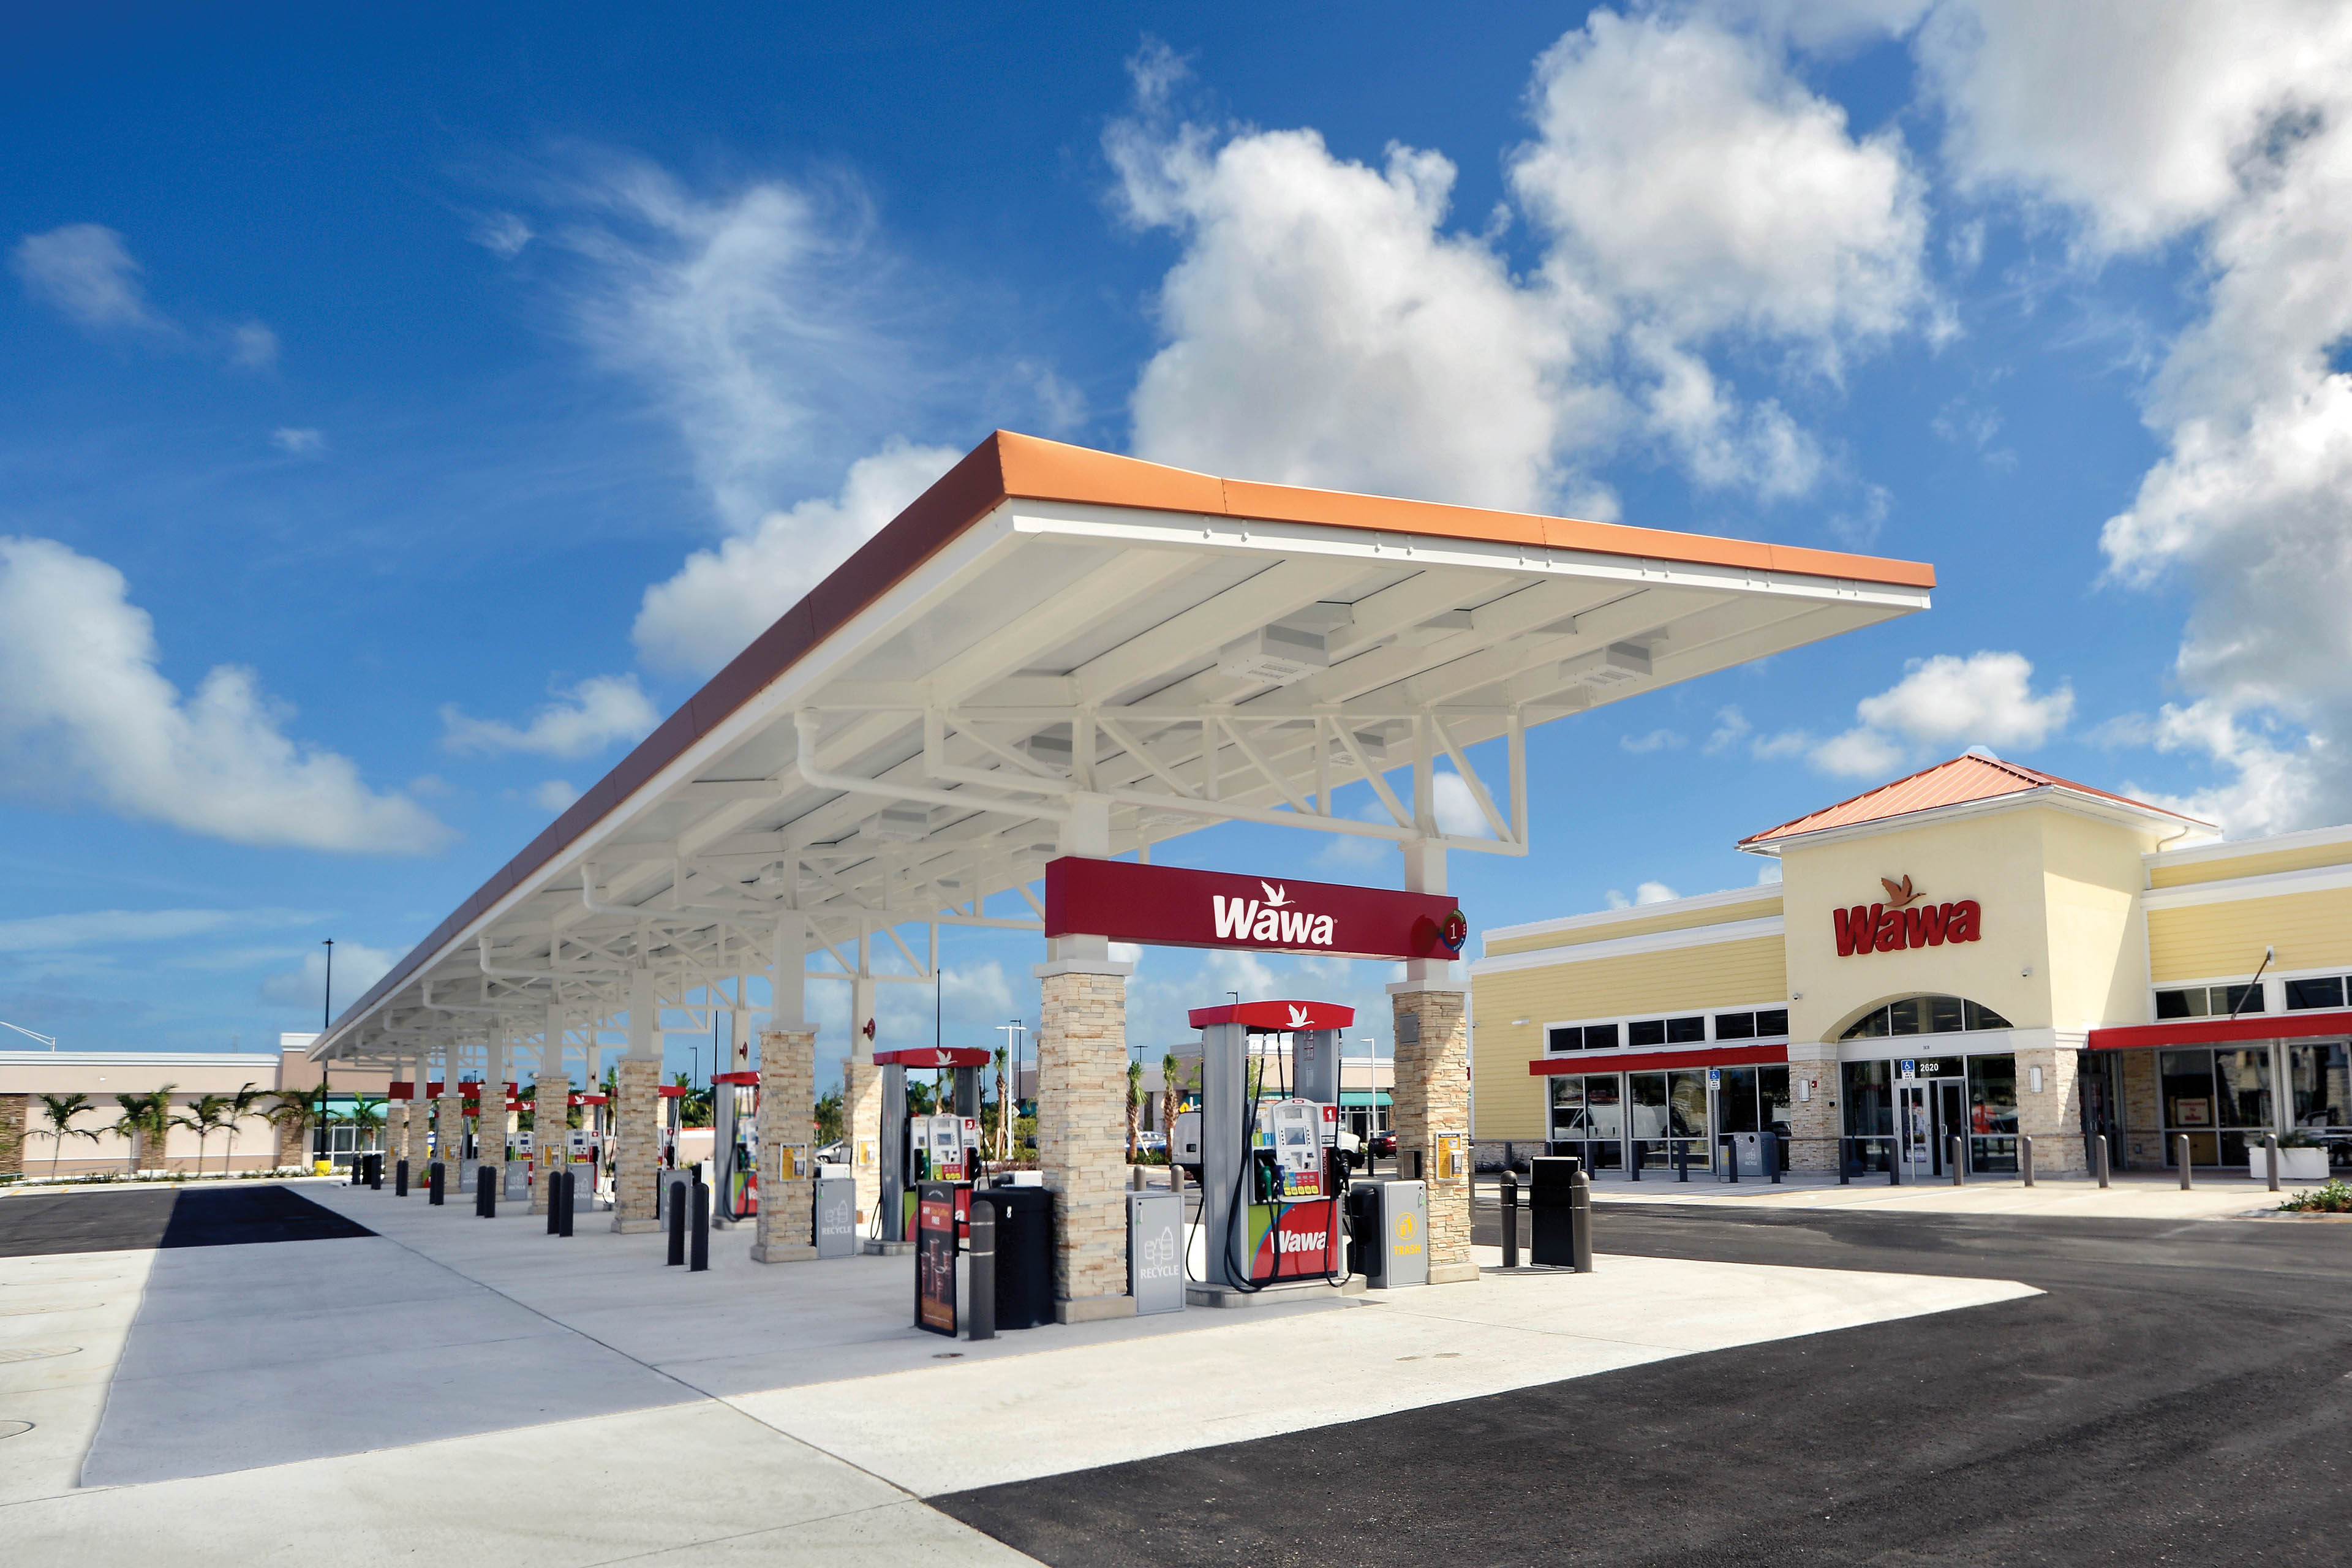 How Wawa is catering to customers with new convenient offerings. Wawa implements new technologies, keeping customers at the center of its offerings.